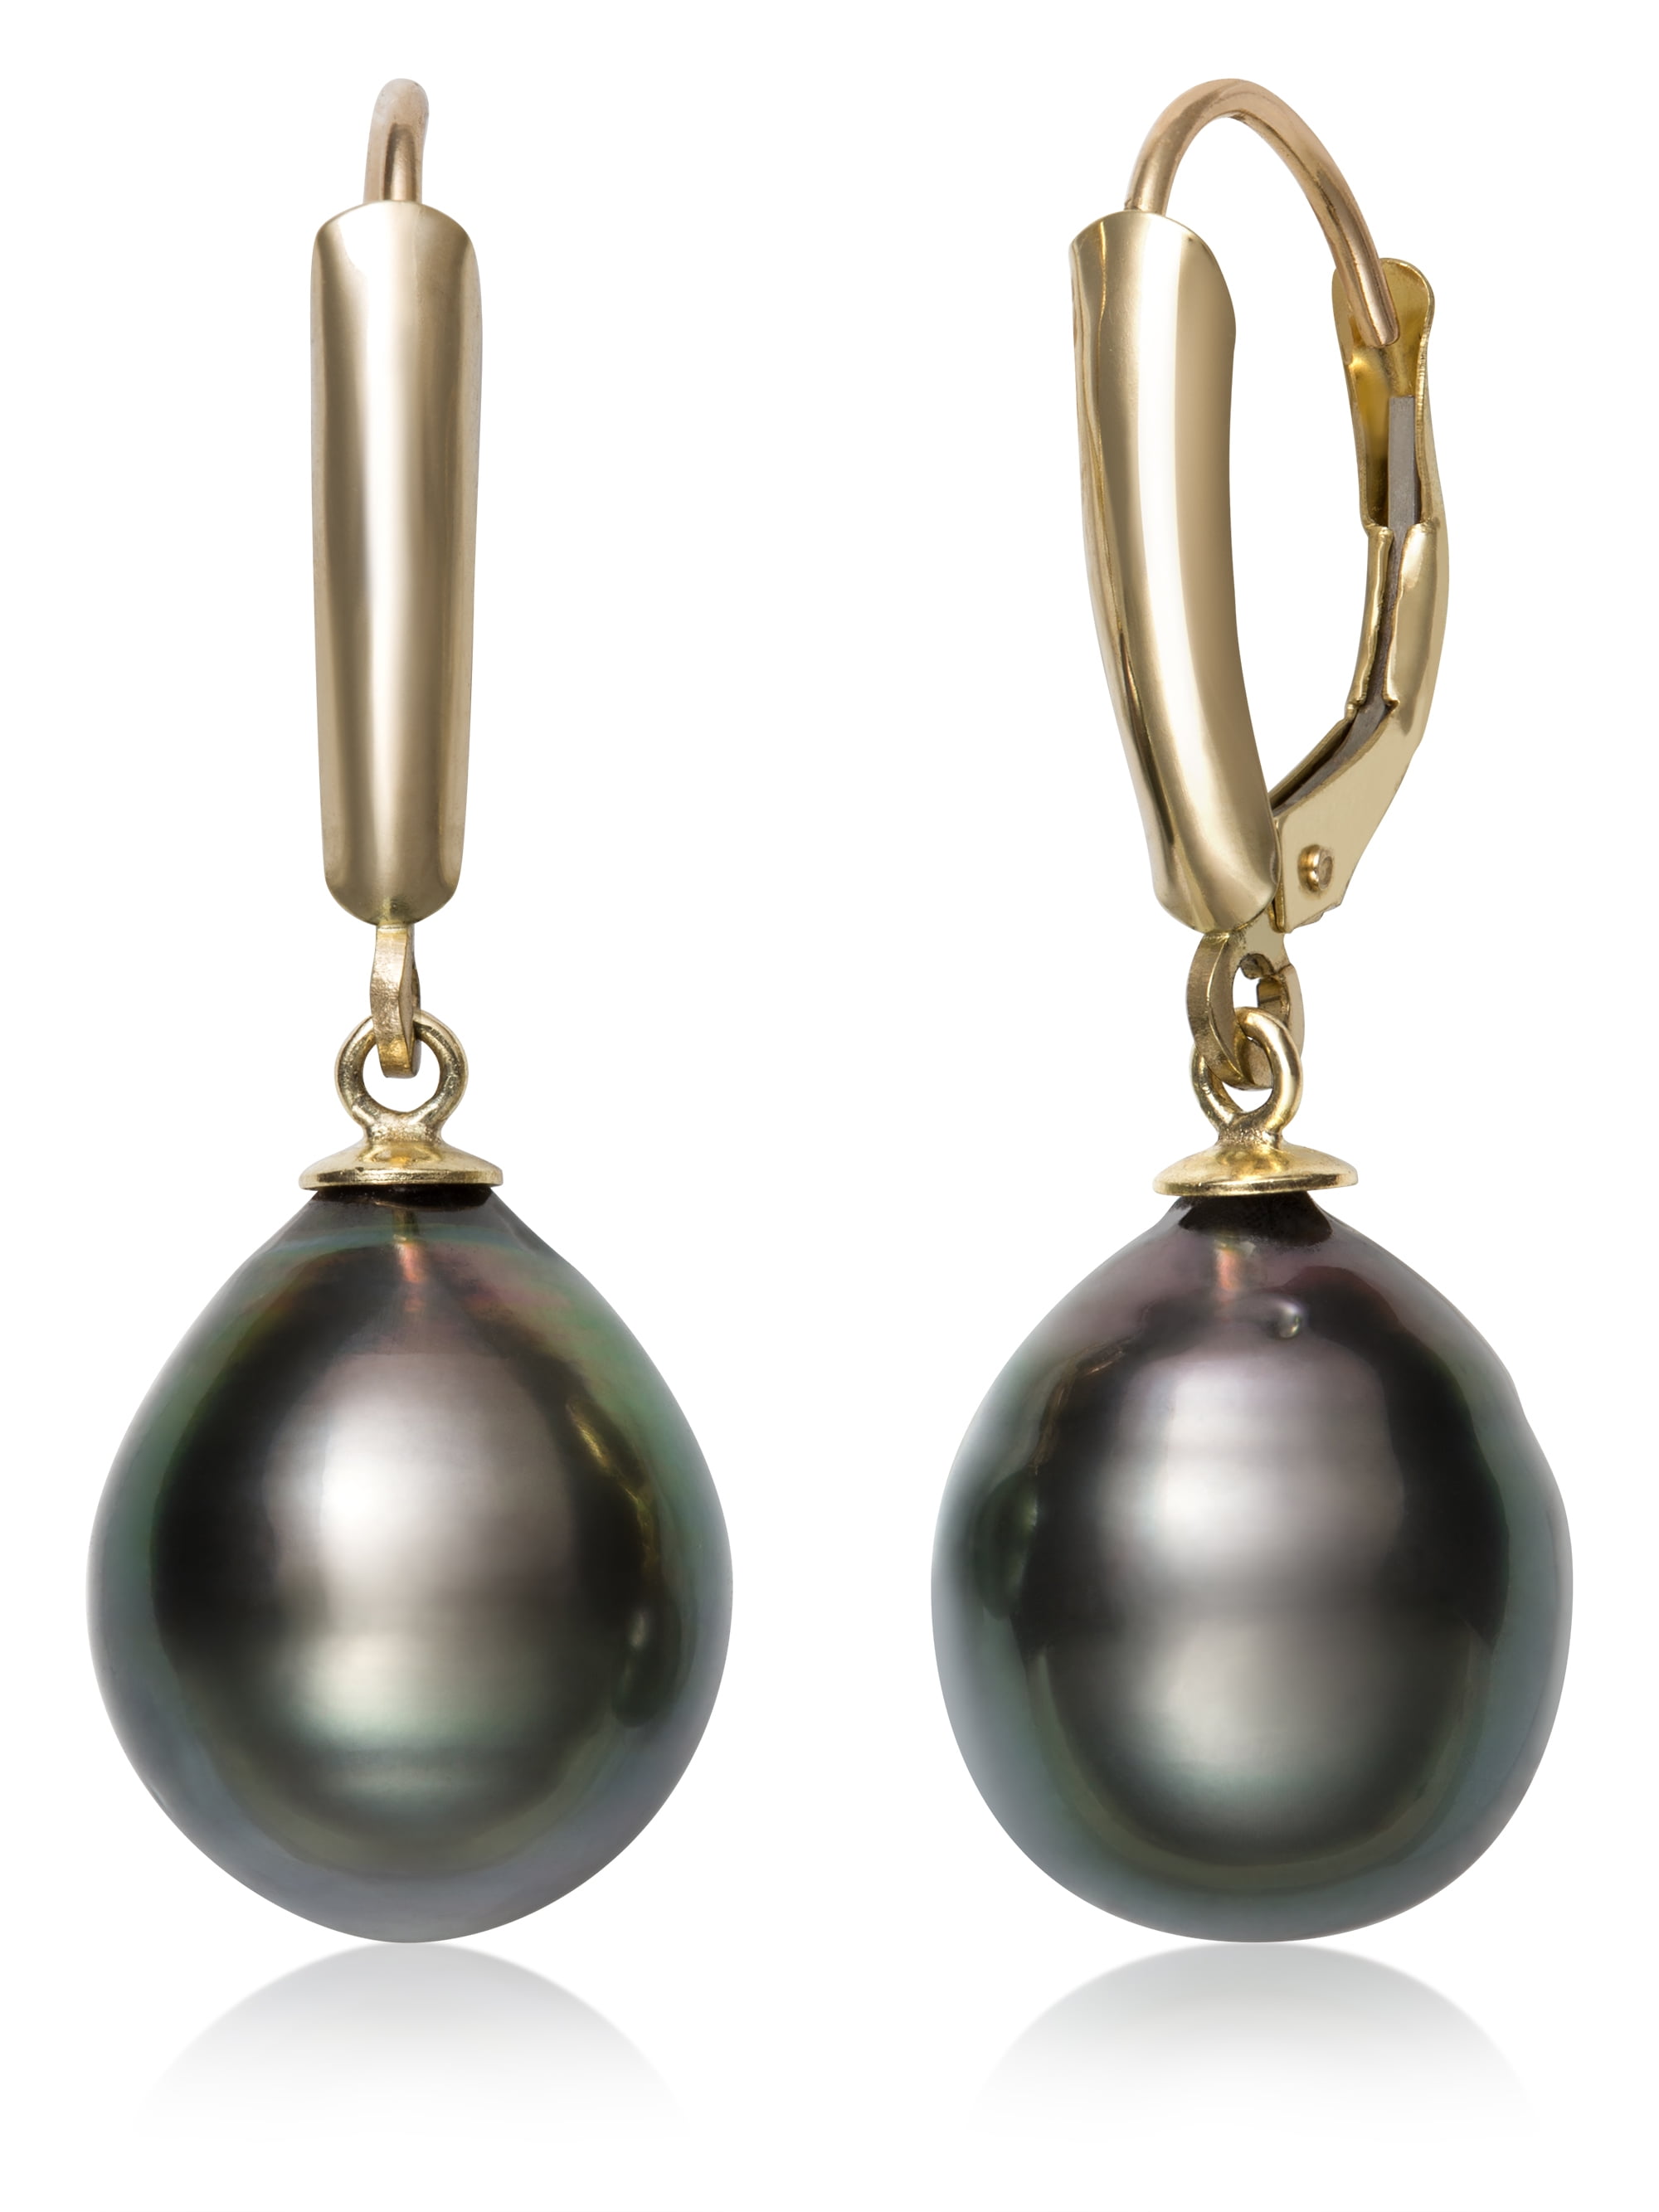 SALE 7-9mm Drop Black Natural Freshwater Pearl With Gold-color Hook Earring-e568